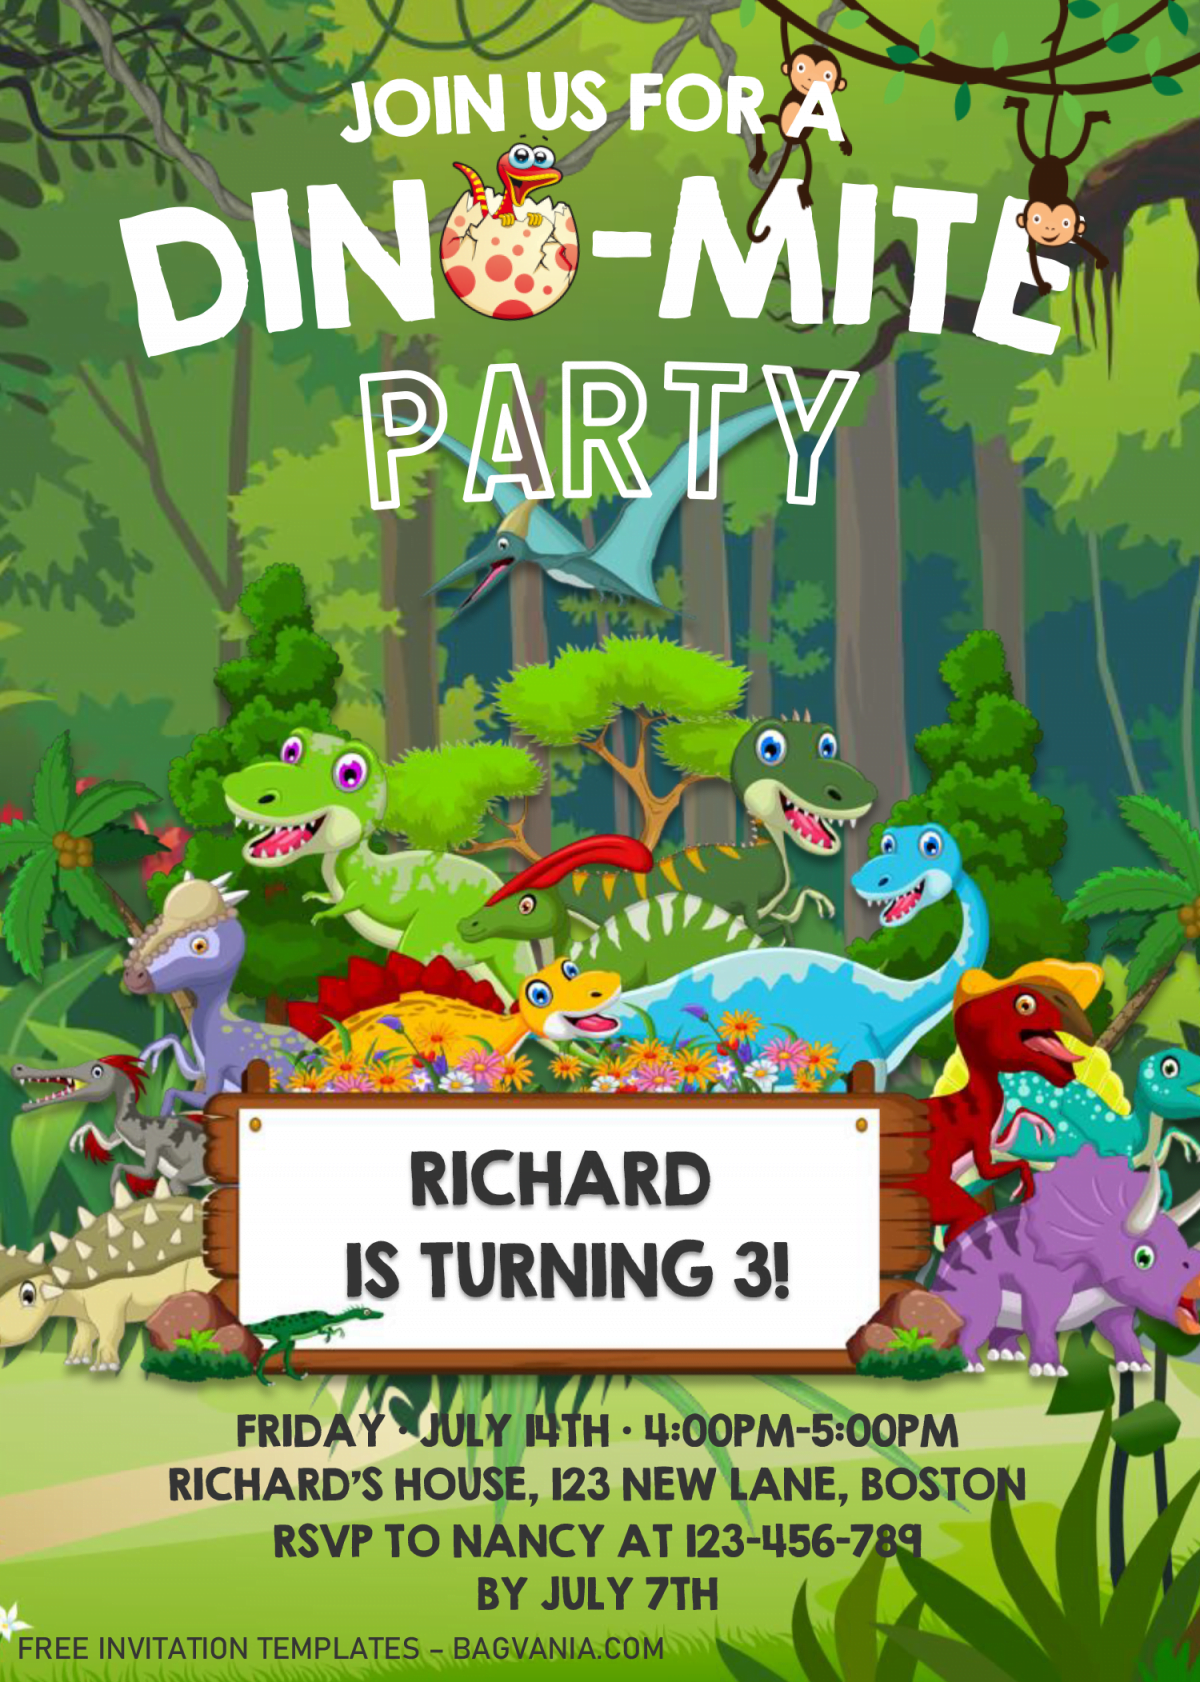 Dinosaur Invitation Templates - Editable With MS Word and has cartoon forest background